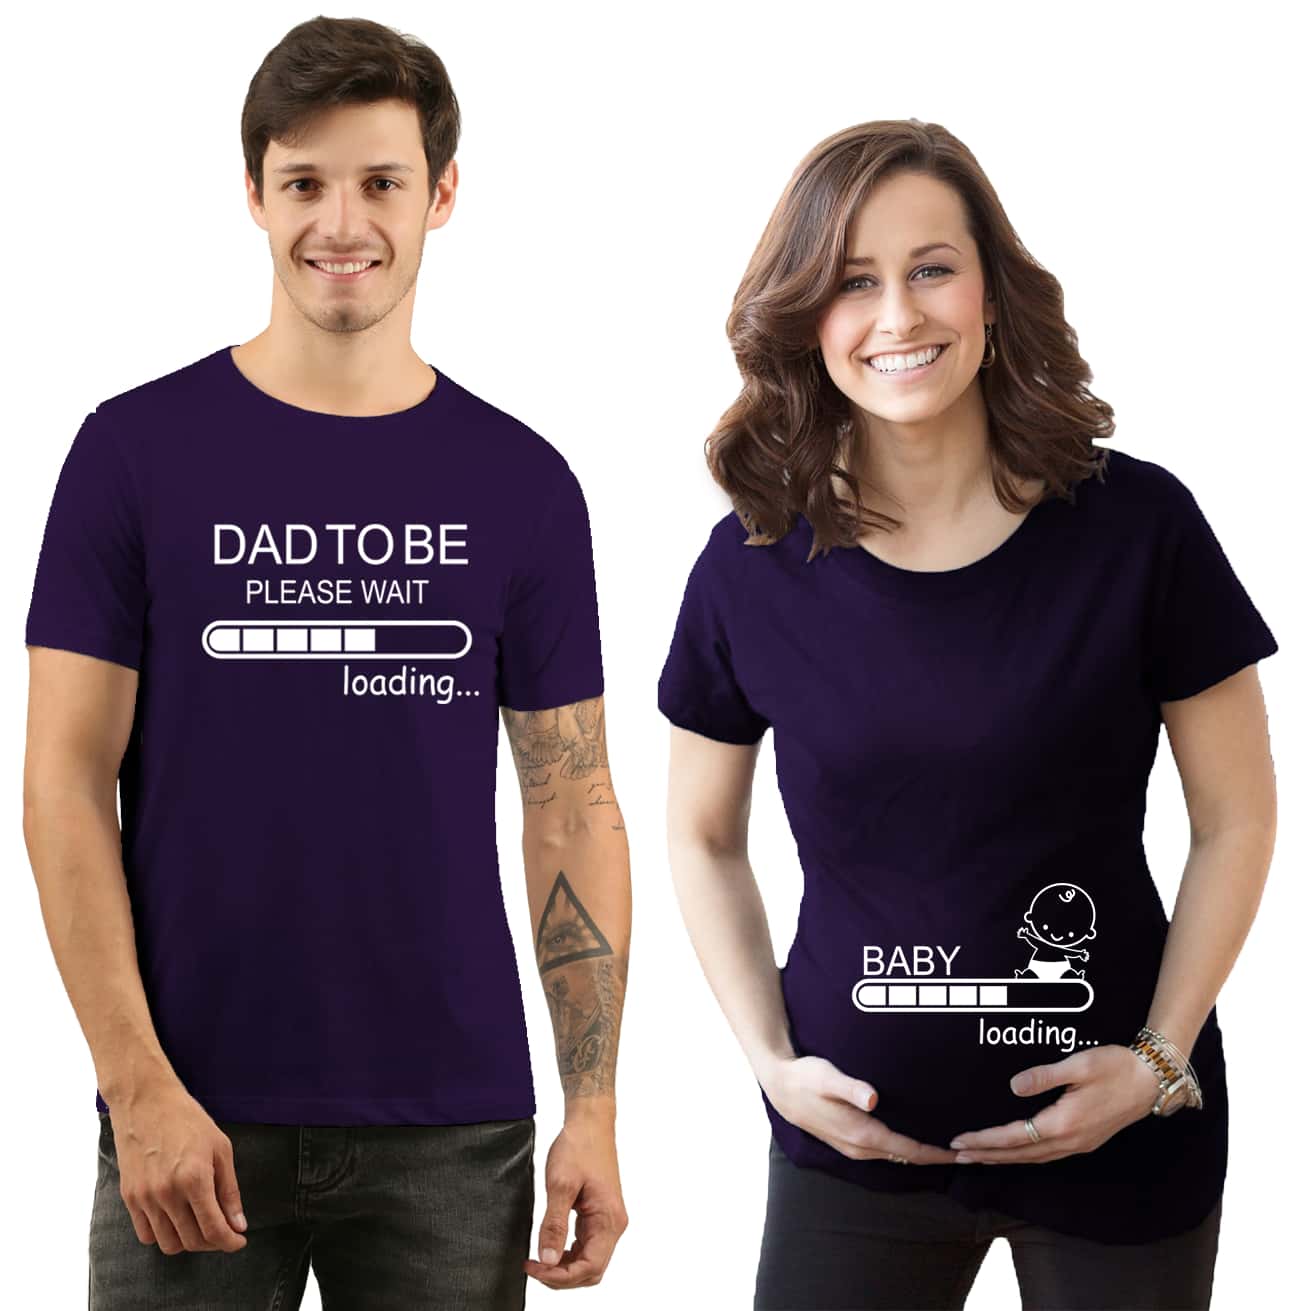 Baby Loading Pregnancy Announcement TShirts Online navy